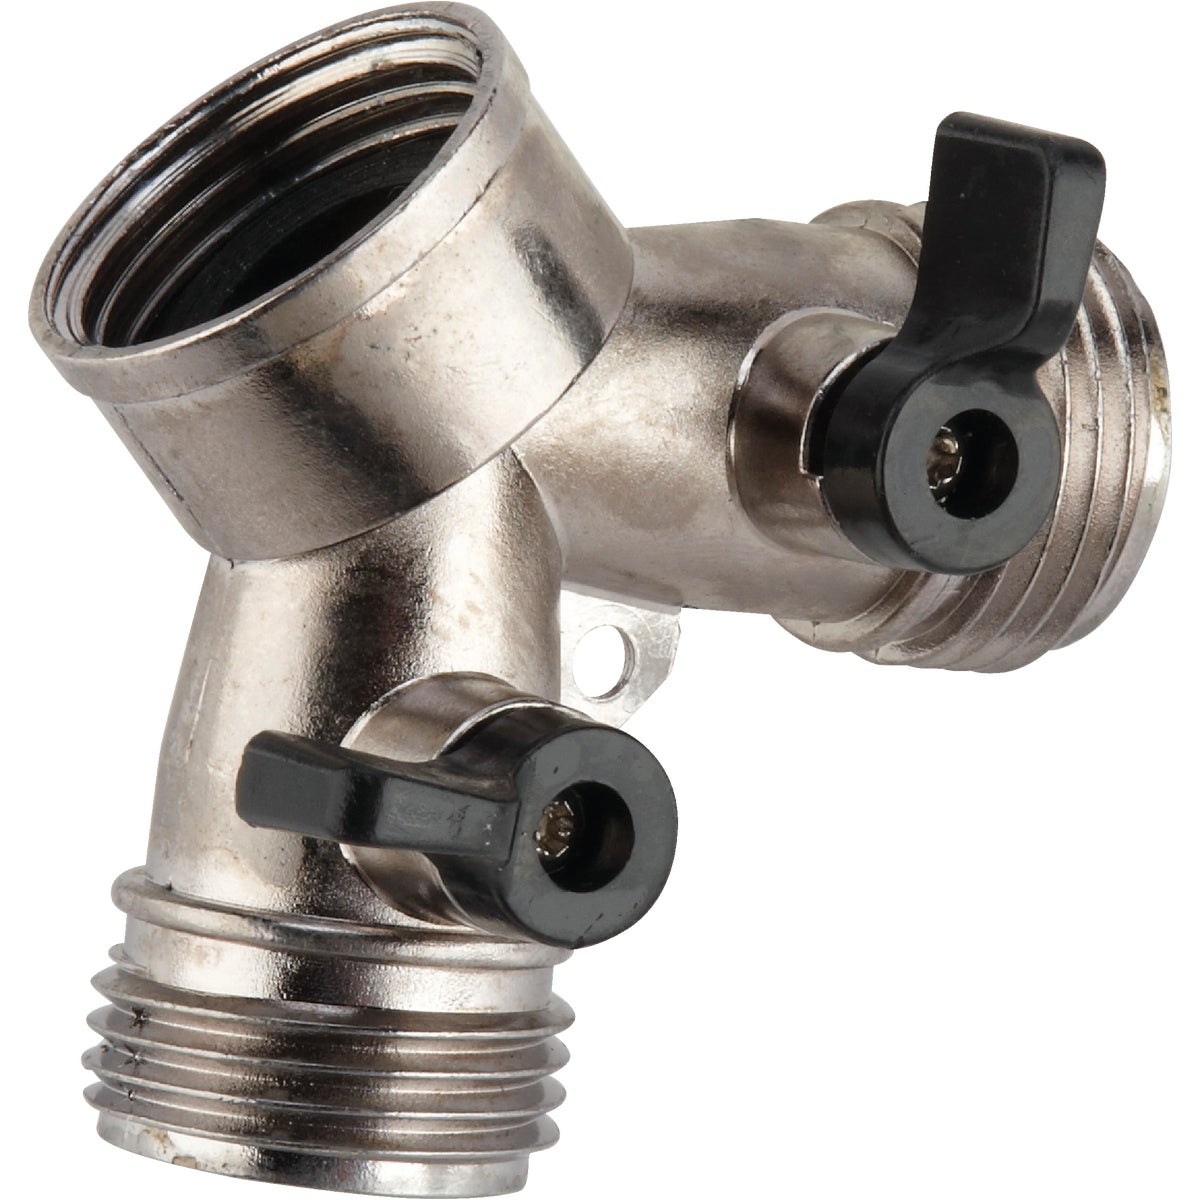 Item 575899, Control water flow with a quarter-turn pressure seated valve.